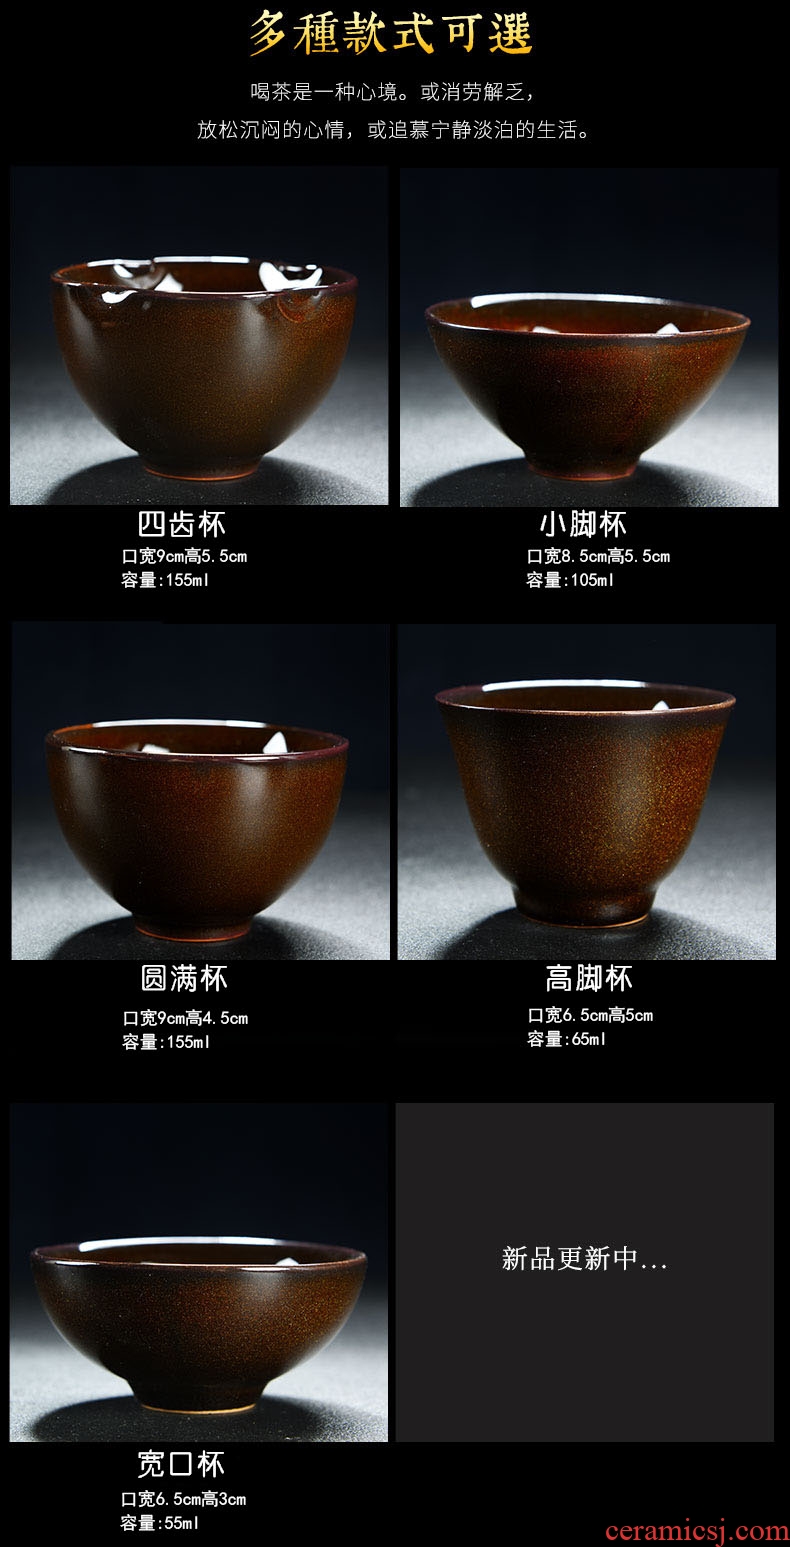 Old looking, kung fu tea set variable temmoku built large cup light ceramic sample tea cup masters cup home small bowl